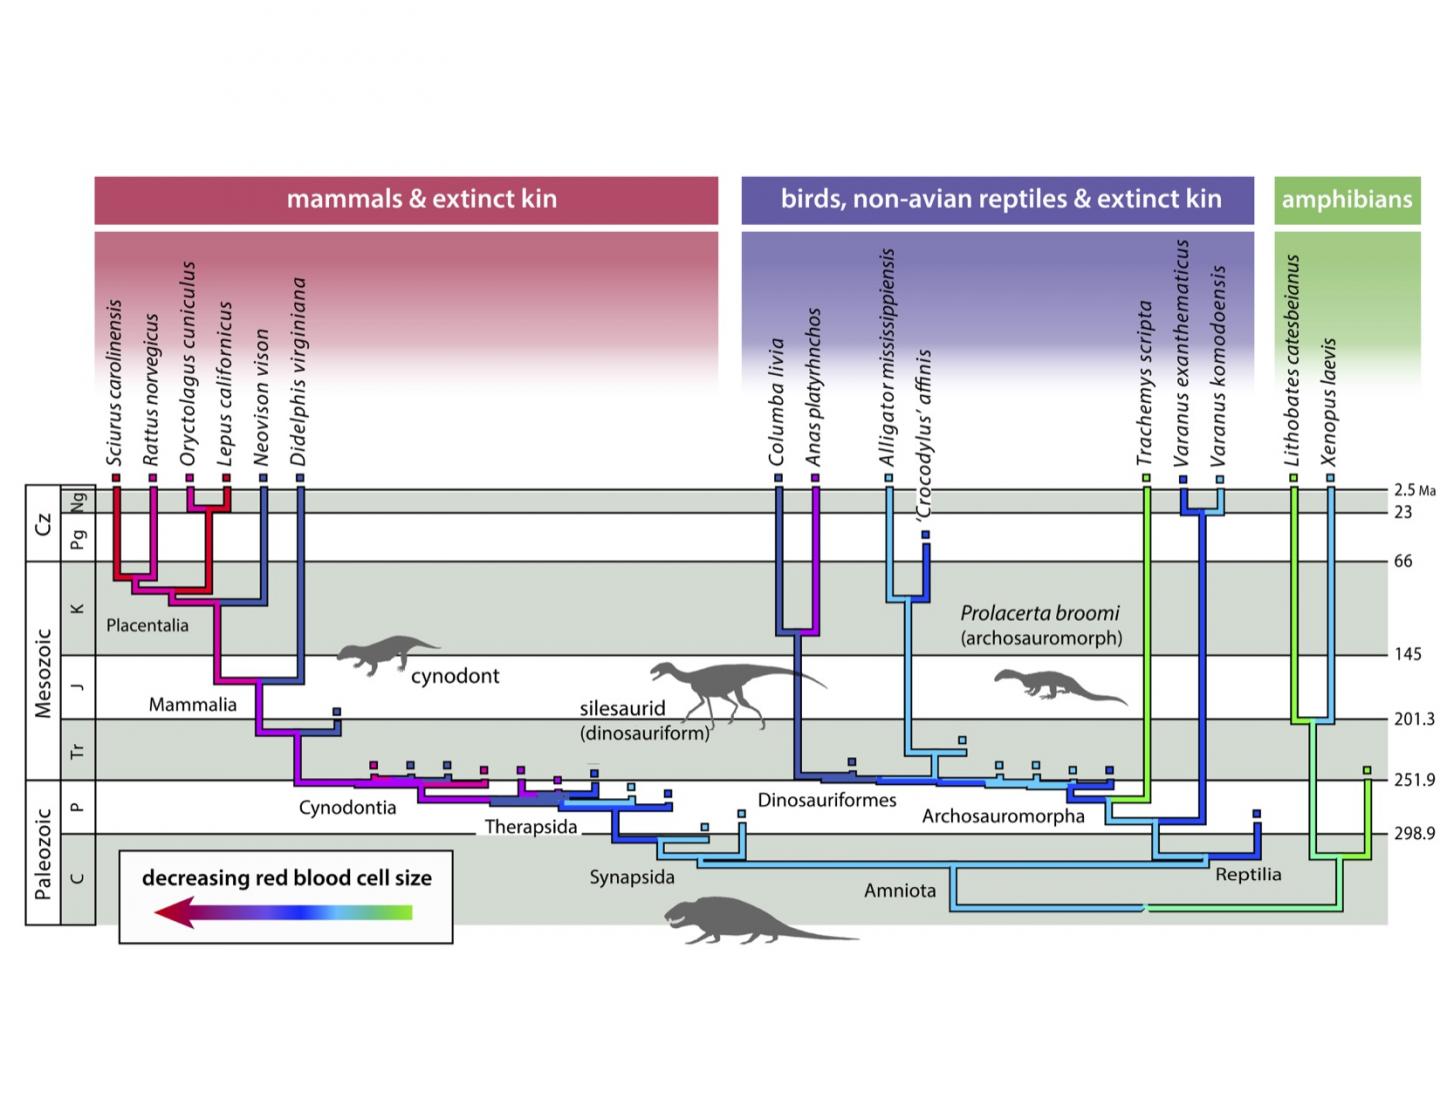 Evolutionary Tree of Ancestral Red Blood Cell Sizes of Tetrapods